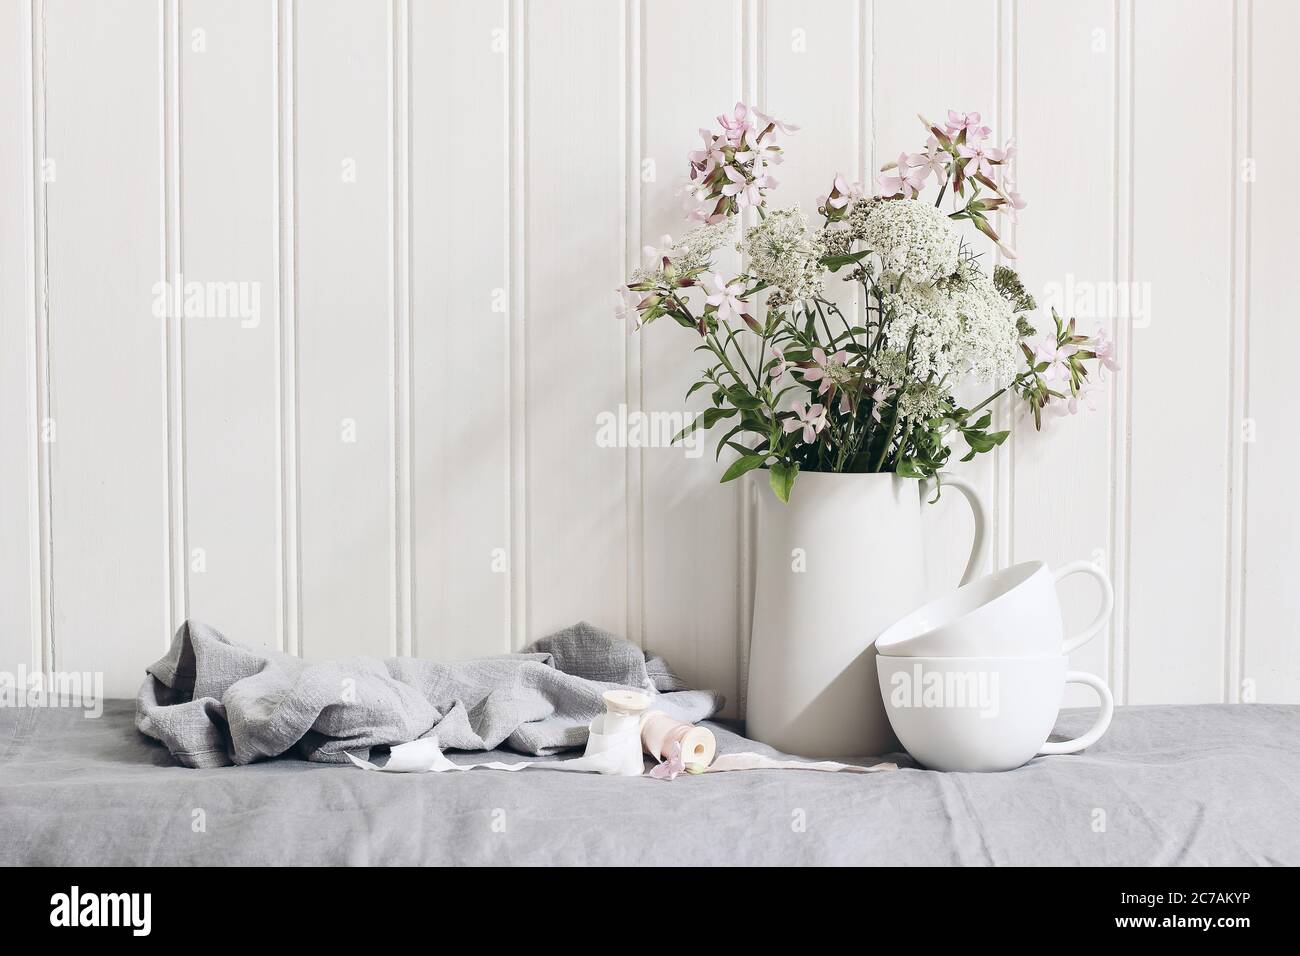 Bouquet of pink soapwort and wild carrot flowers in ceramic pitcher. Empty coffee cups on linen table cloth. White wooden wall background. Feminine Stock Photo